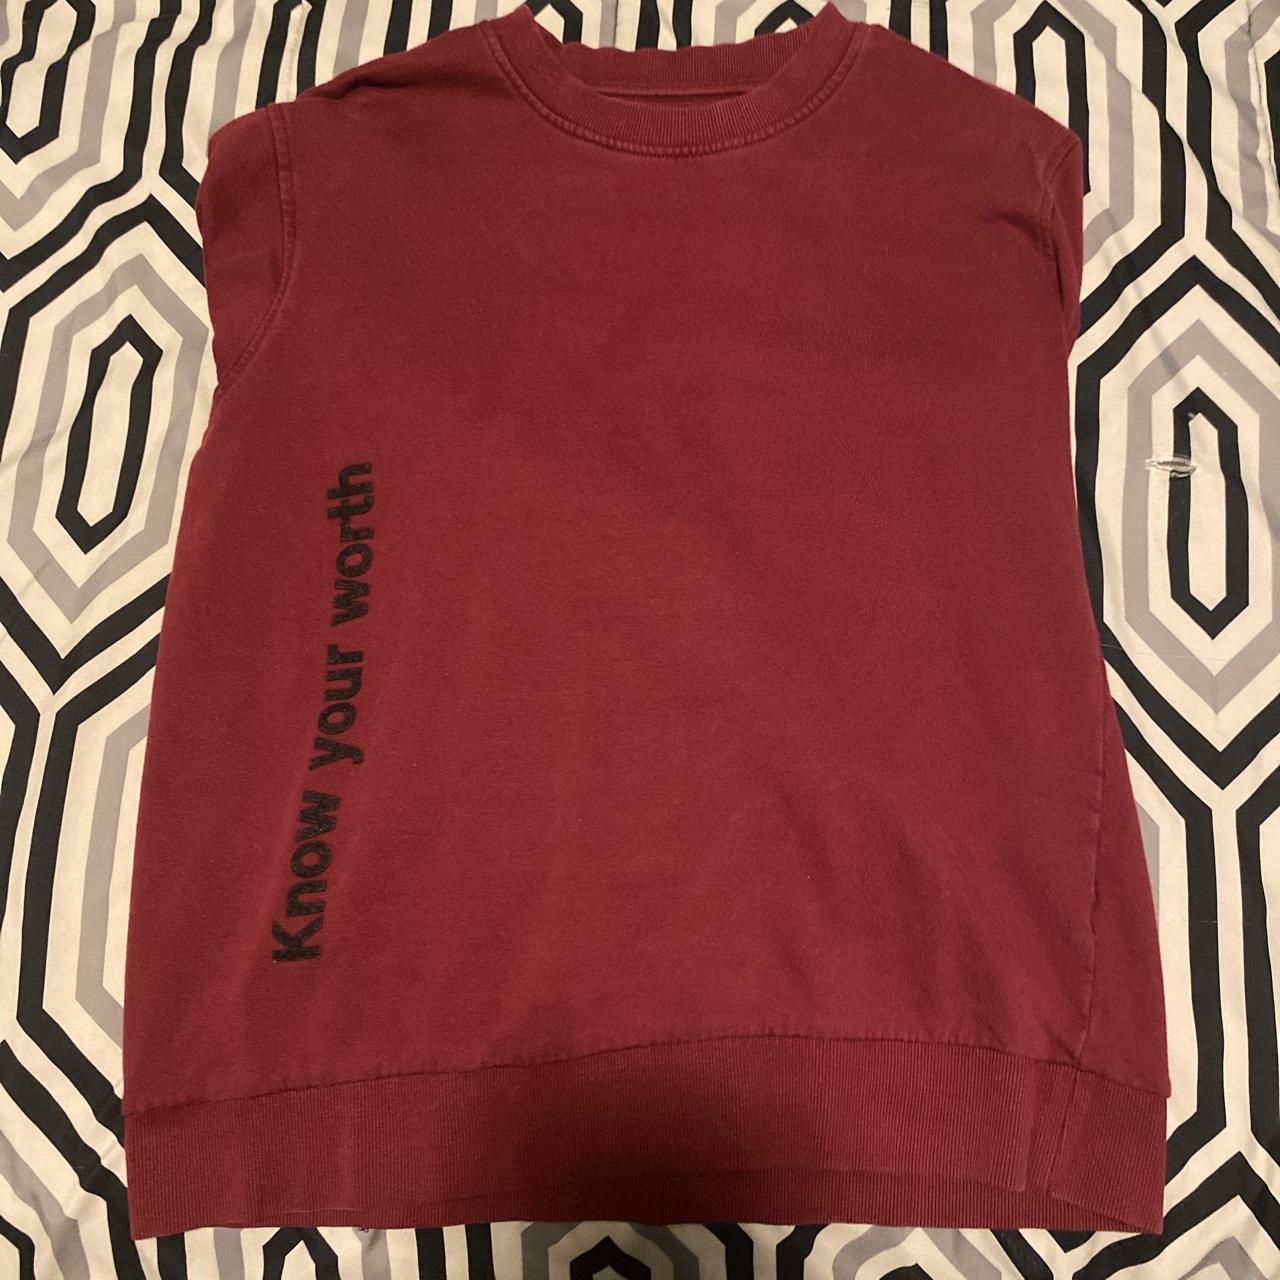 Forever 21 “know your worth” crewneck - Depop